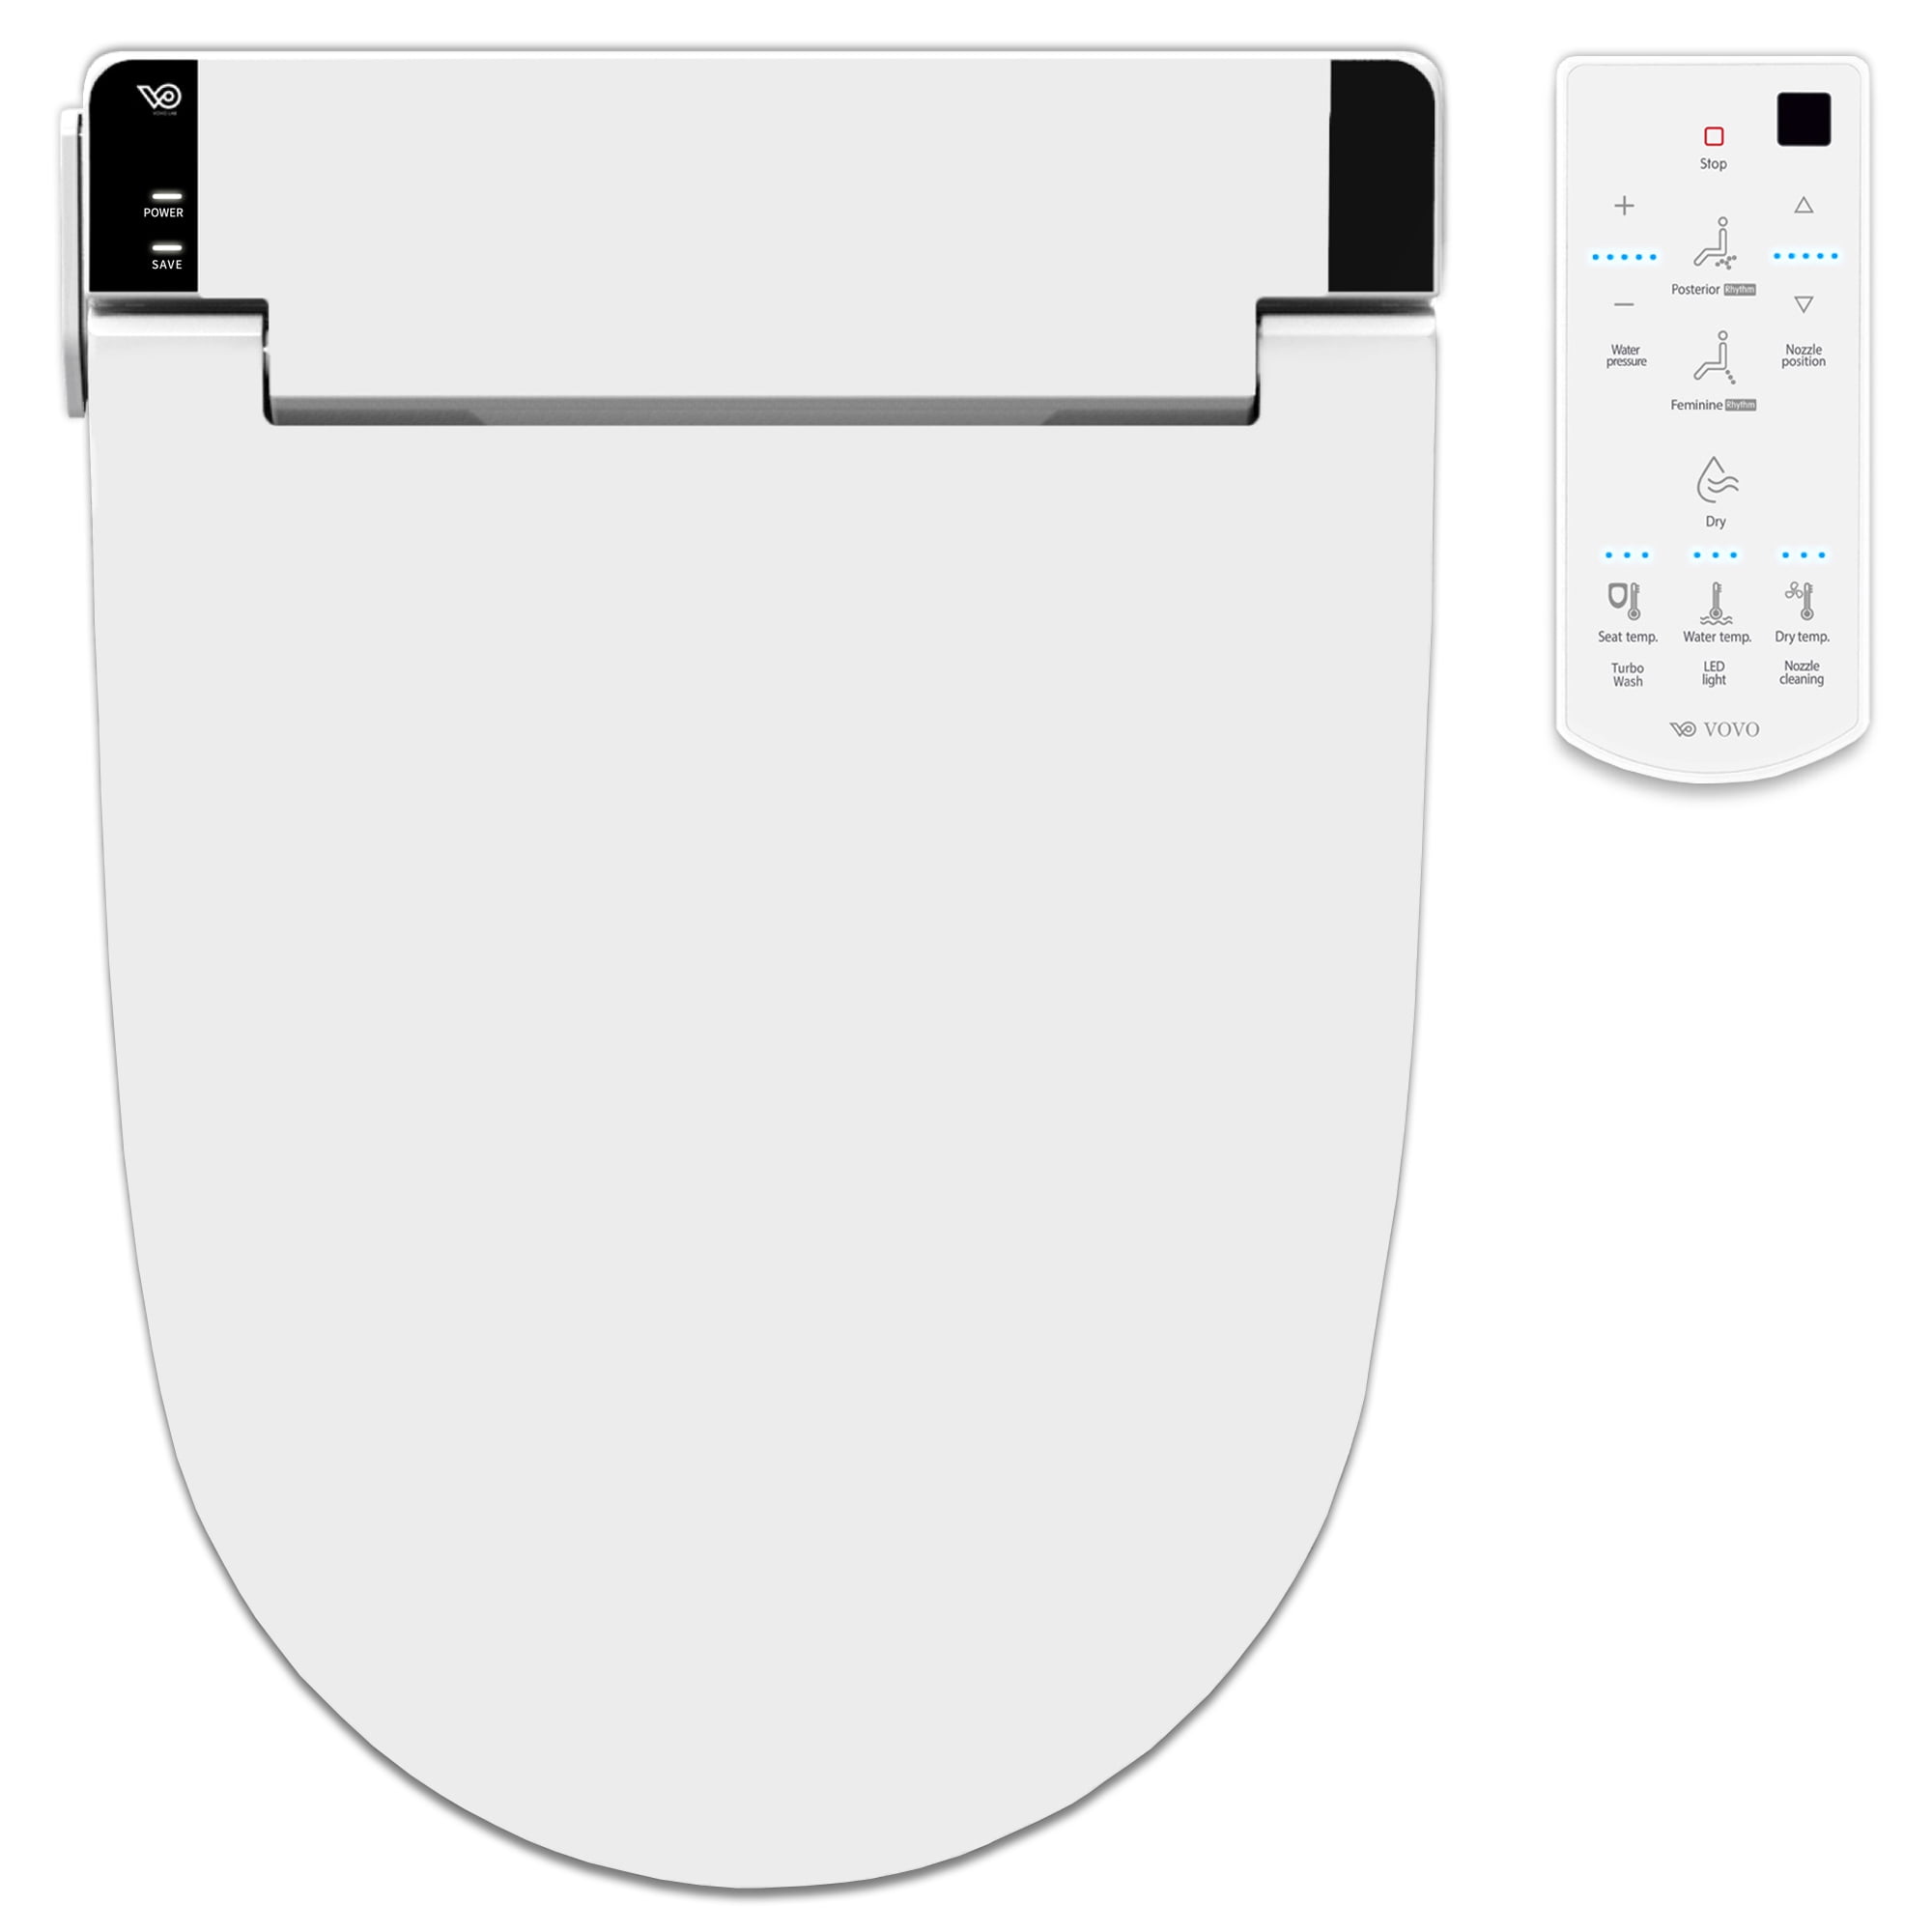 KOHLER K-8298-96 C3 155 Elongated Warm Water Bidet Toilet Seat, Biscuit  with Quiet-Close Lid and Seat, Automatic Deodorization, Self-Cleaning Wand,  Ad キッチン